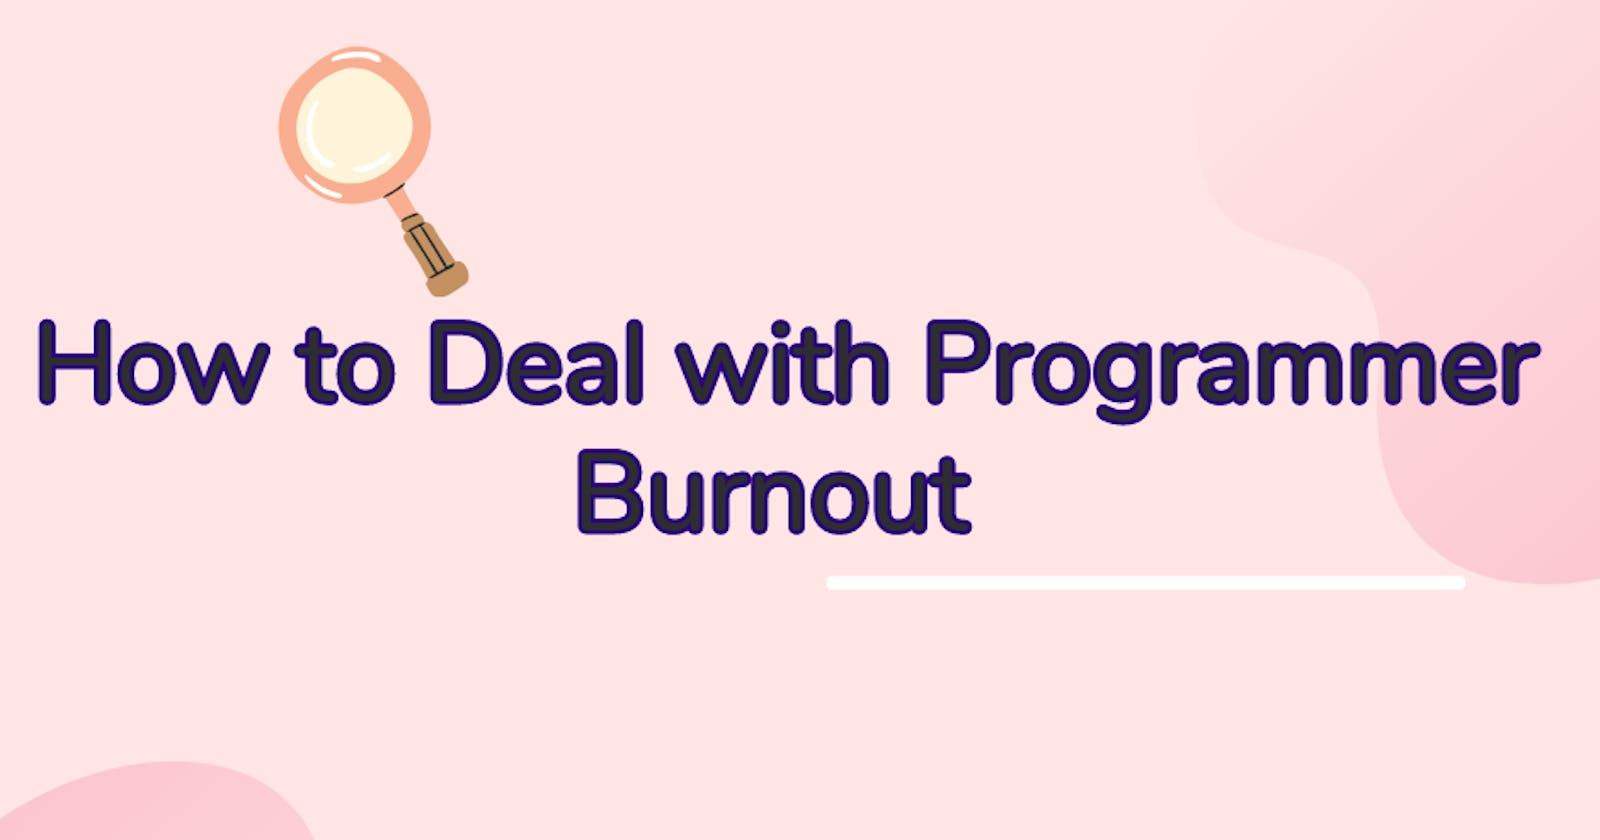 How to Deal with Programmer Burnout